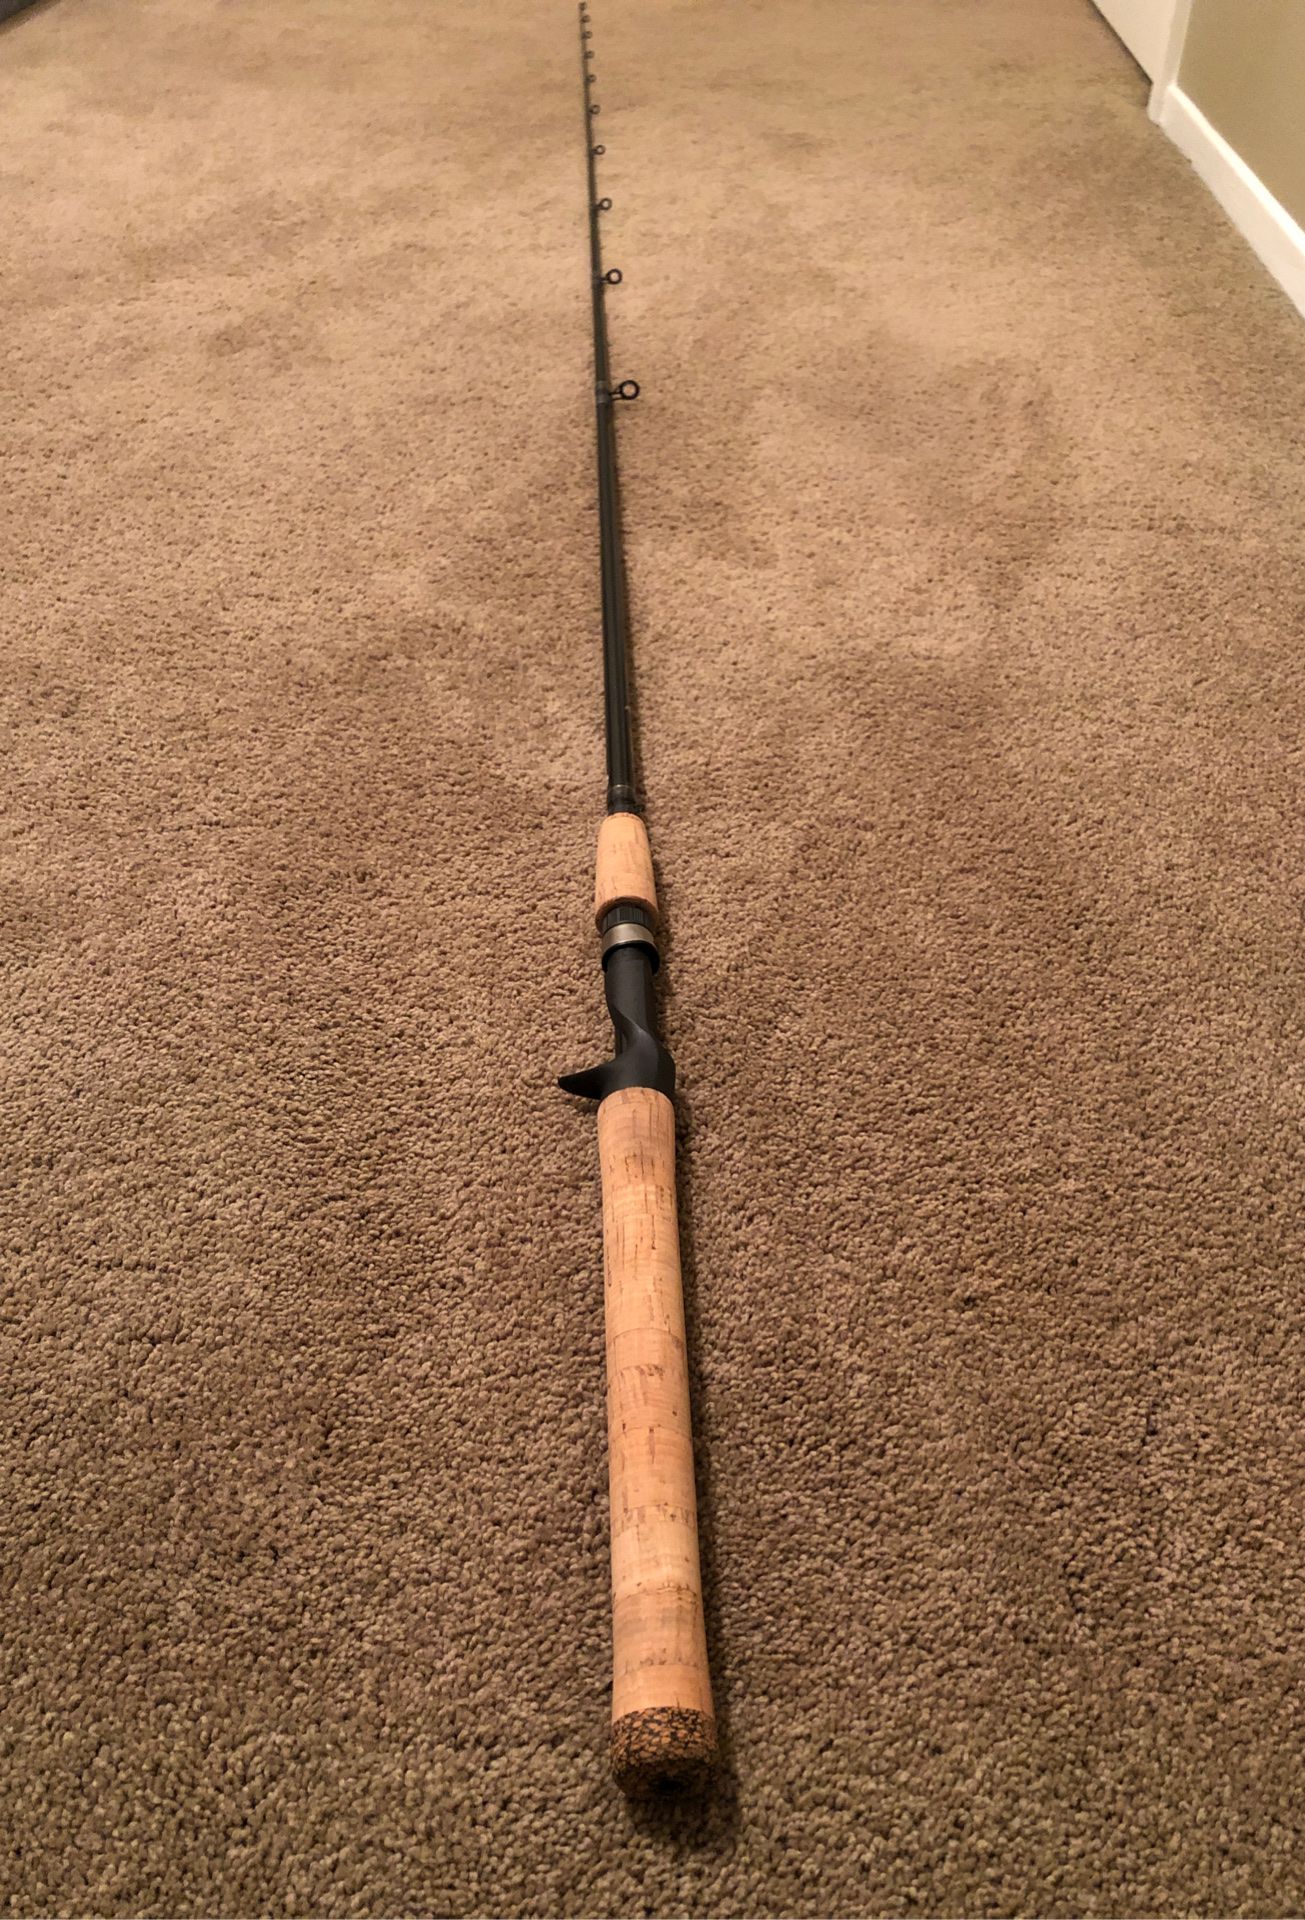 Shimano Compre casting rod 7 foot mint condition $60